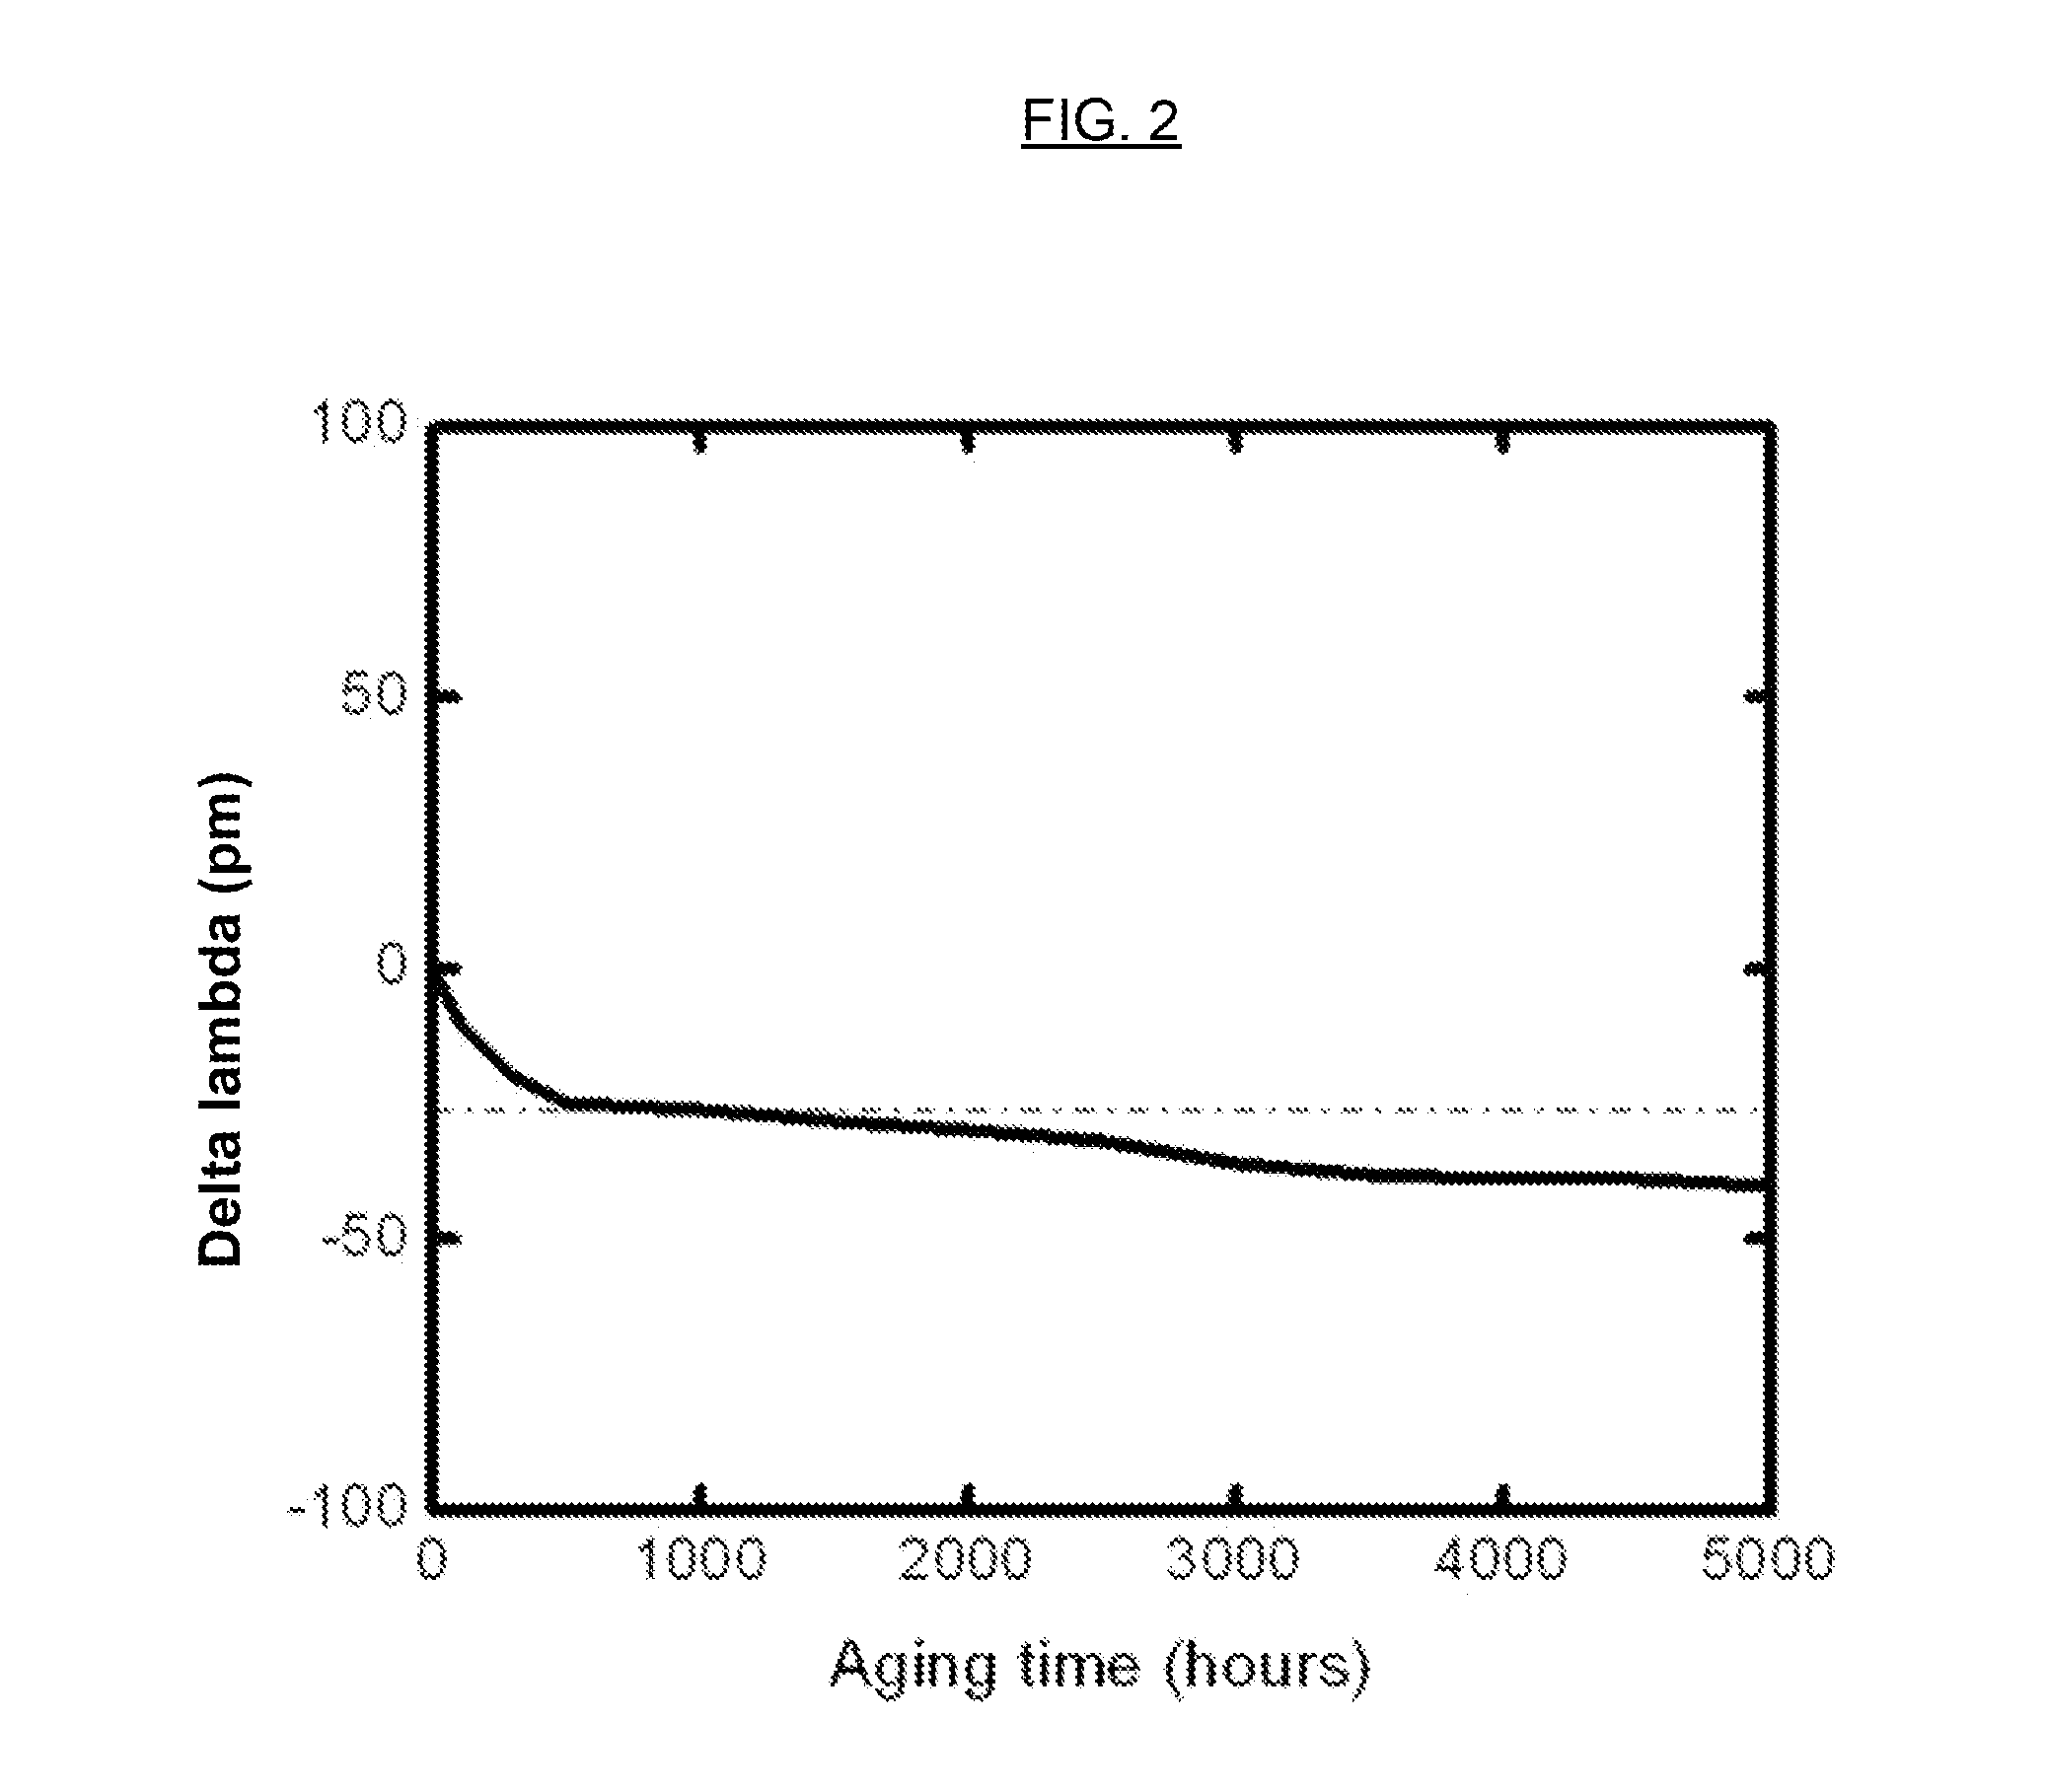 Tunable Dense Wavelength Division Multiplexing Transceiver, Circuits and Devices Therefor, and Methods for Making and Using Such Transceivers, Circuits and Devices